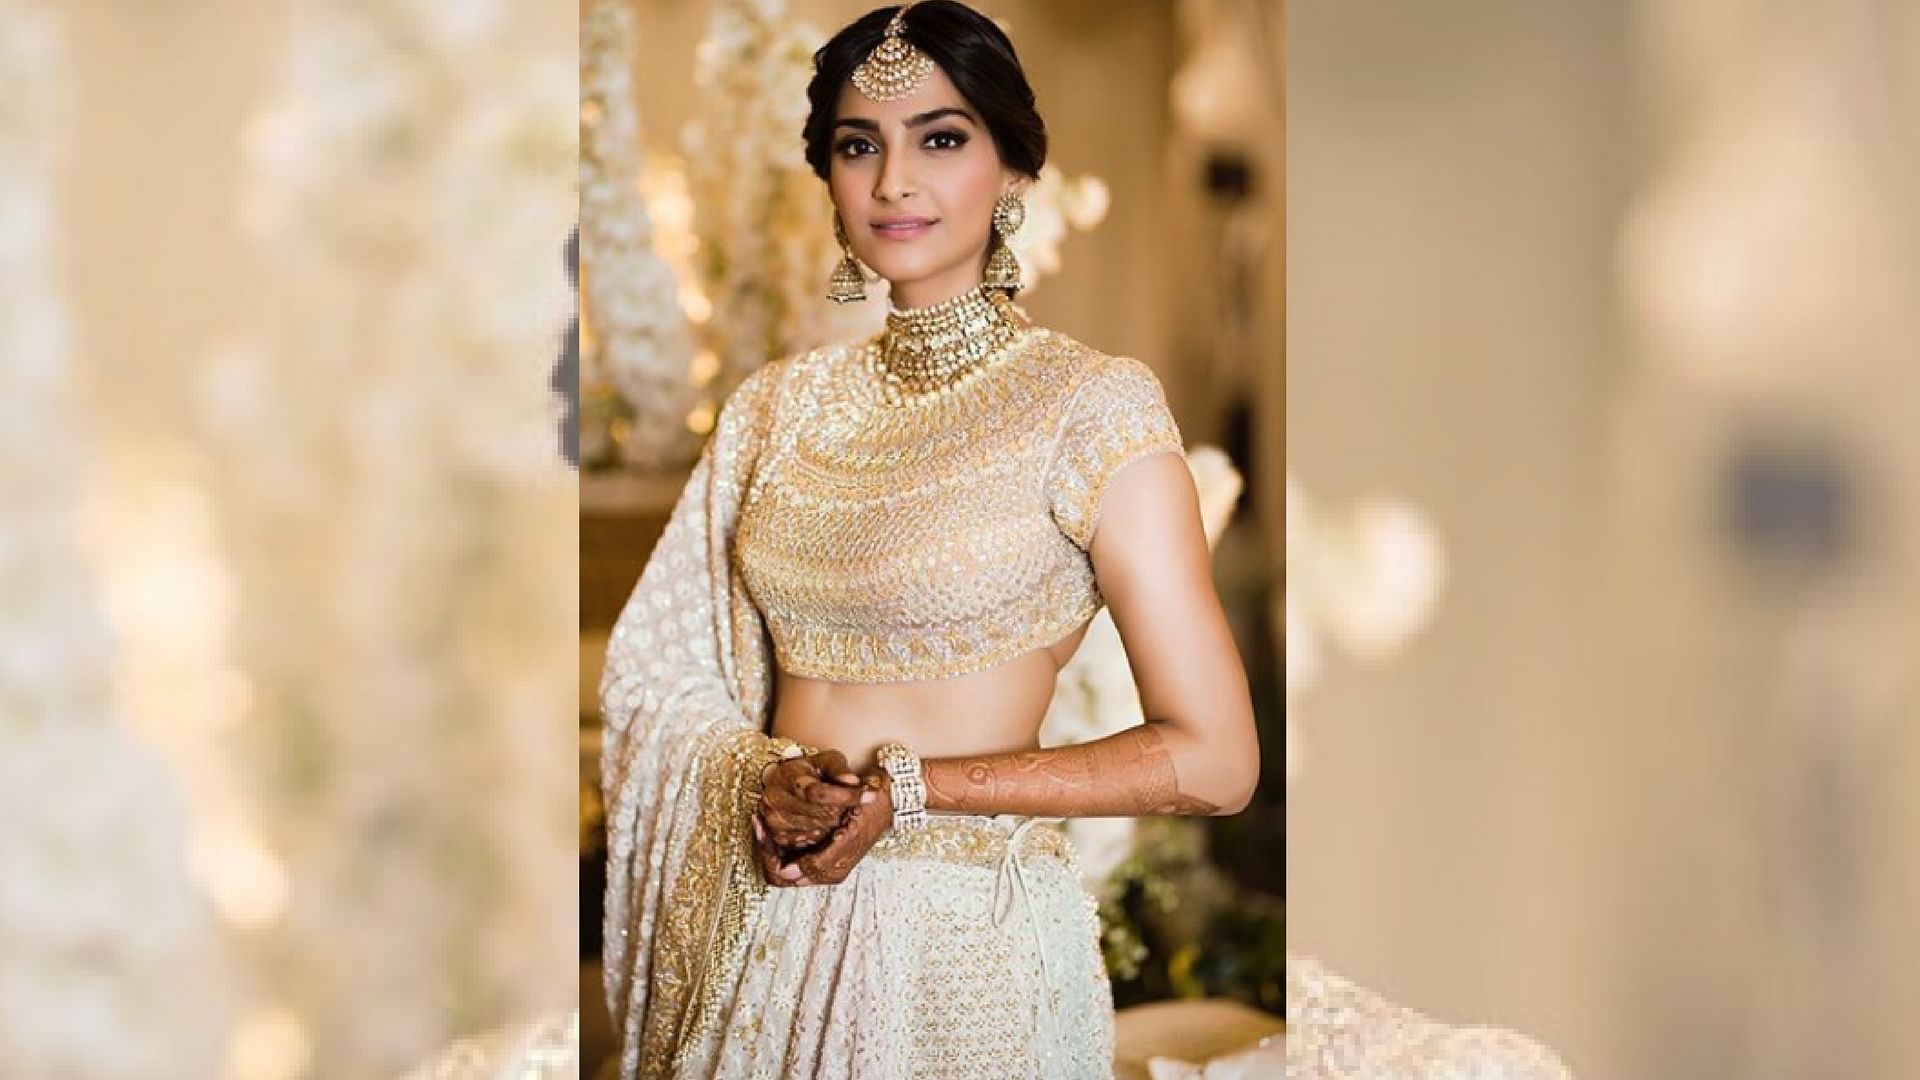 Sonam Kapoor is a vision in white.